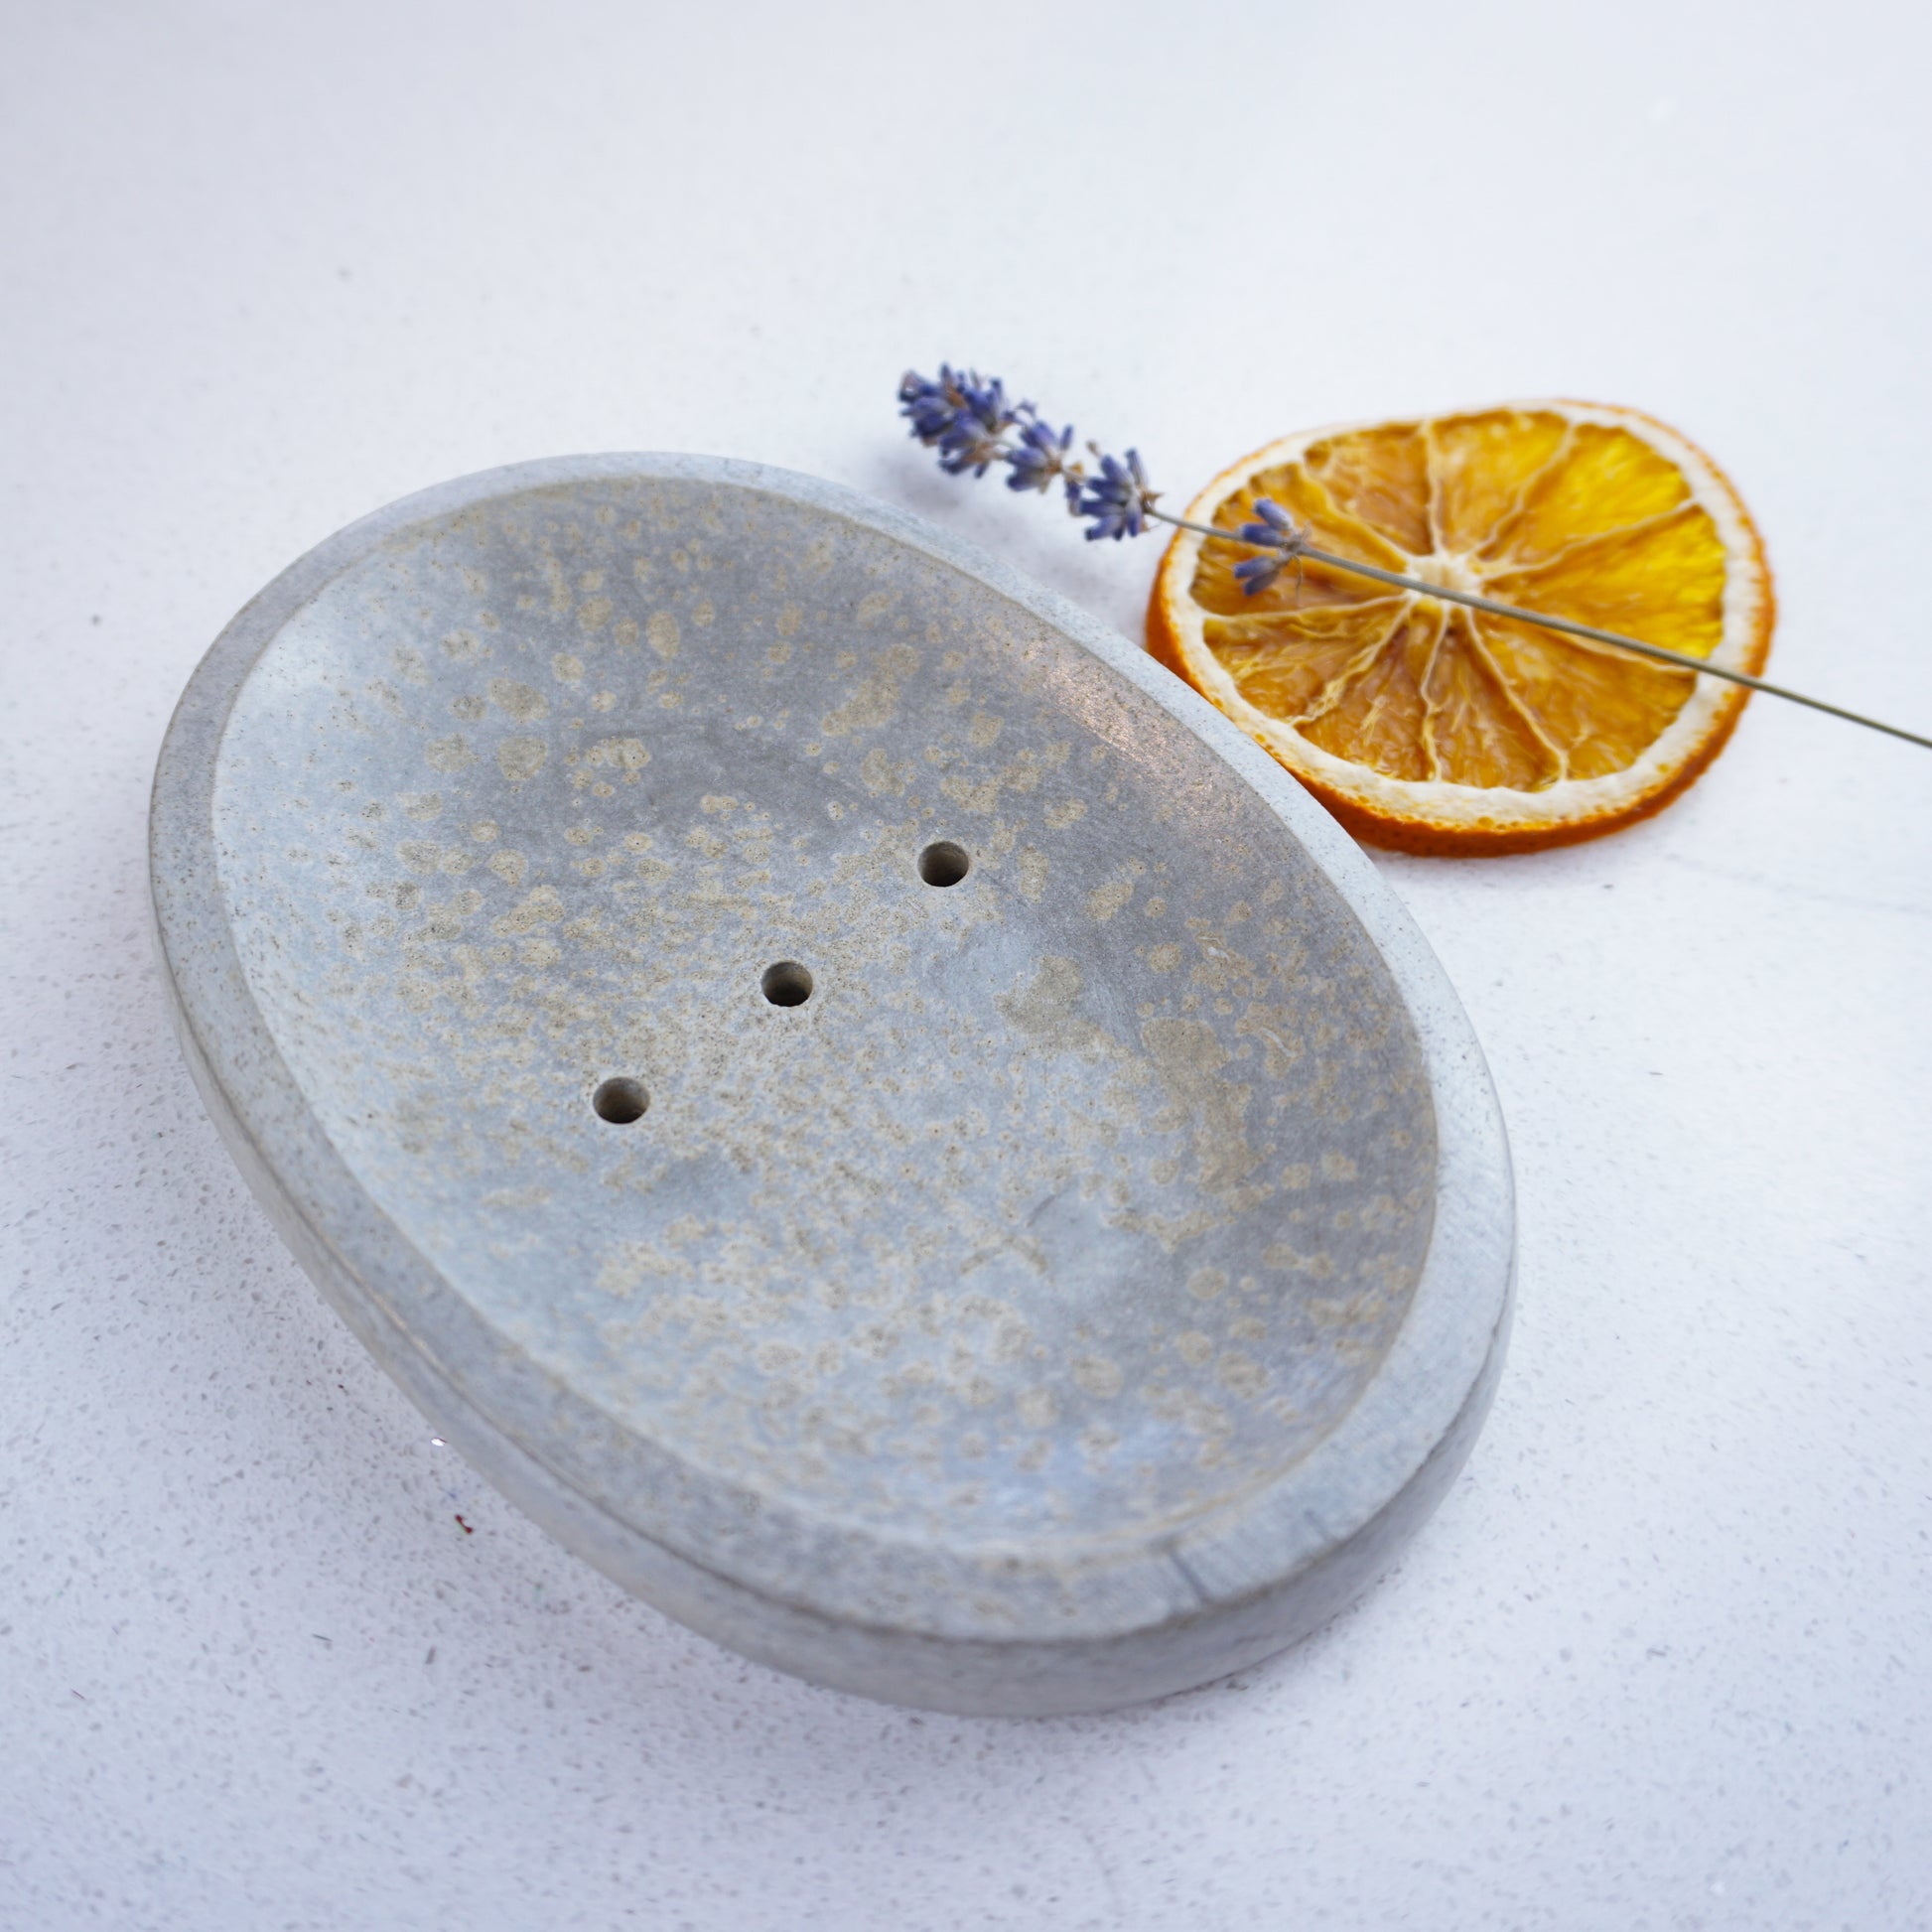 Concrete dish with lavender and orange sitting beside it for decoration